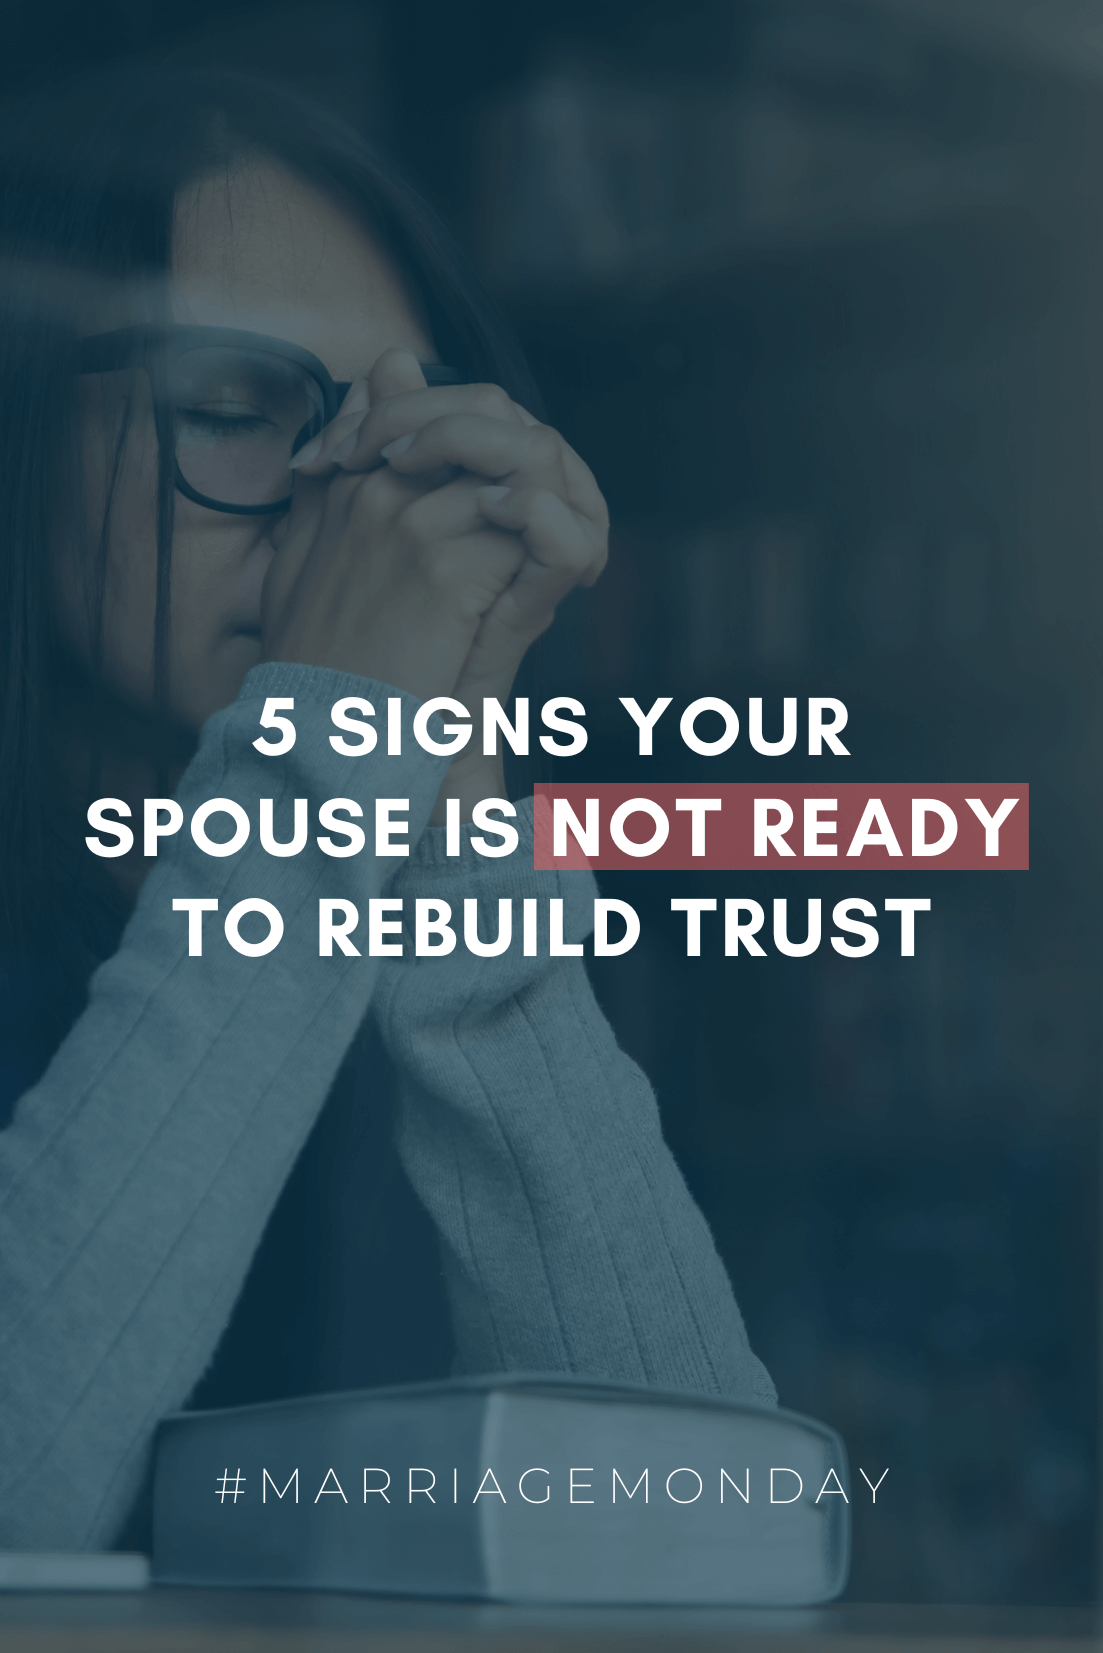 5 Signs Your Spouse is Not Ready to Rebuild Trust | #MarriageMonday